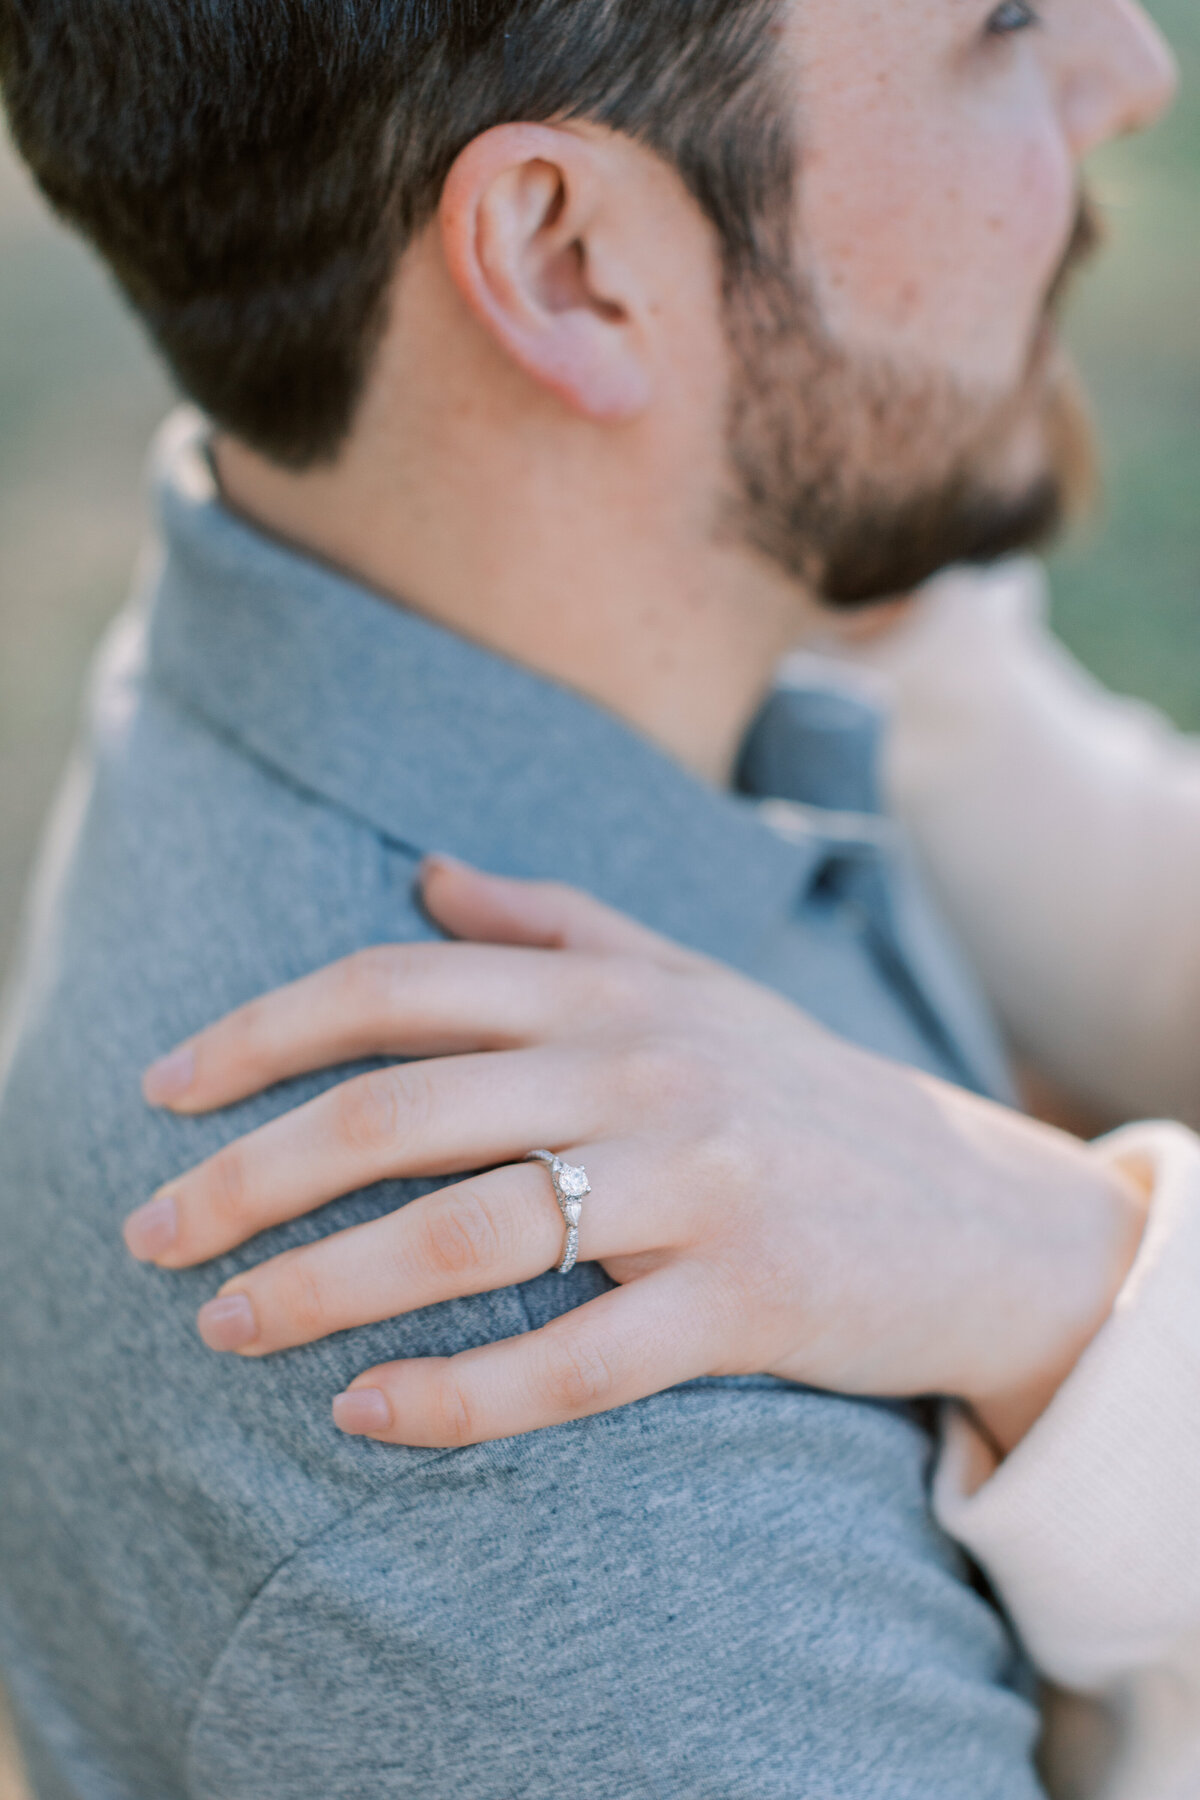 A classic engagement ring is worn.